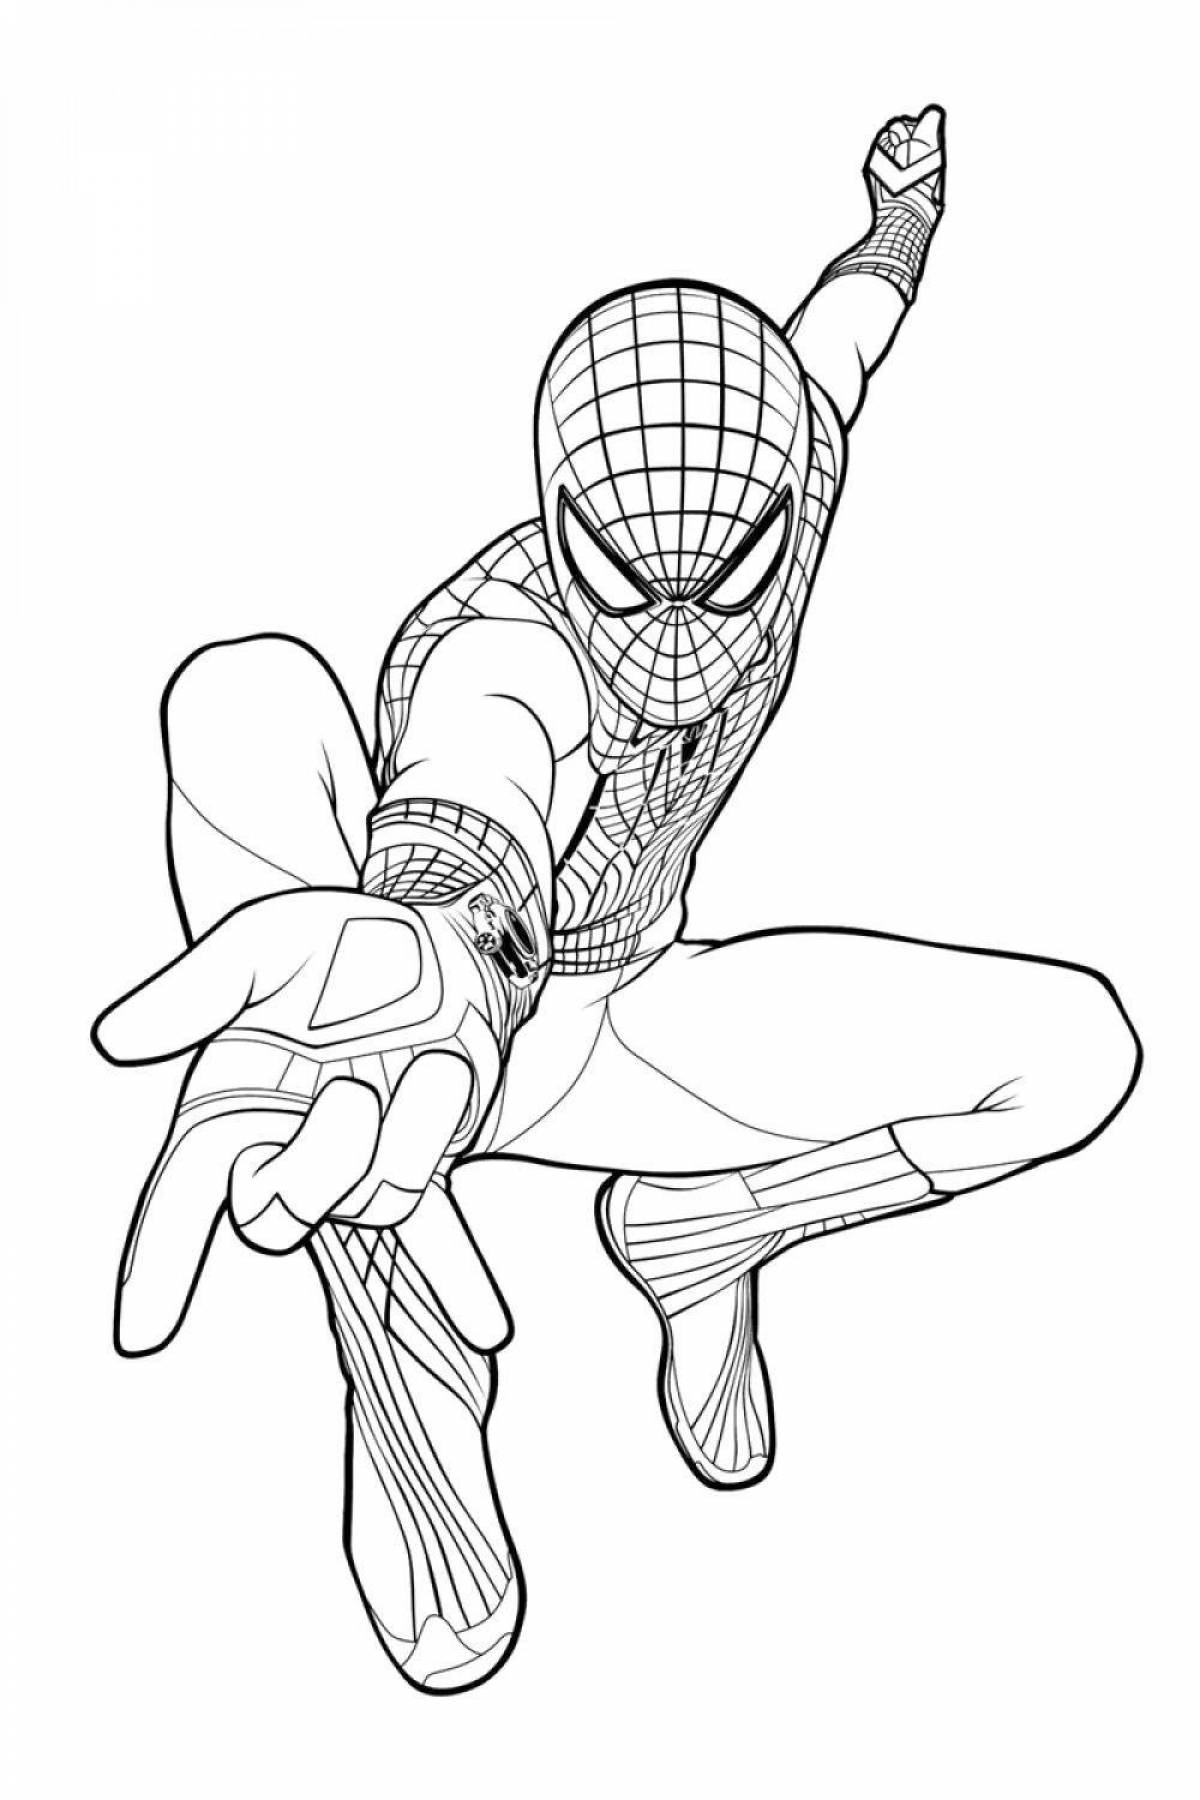 Spider man in good quality #3